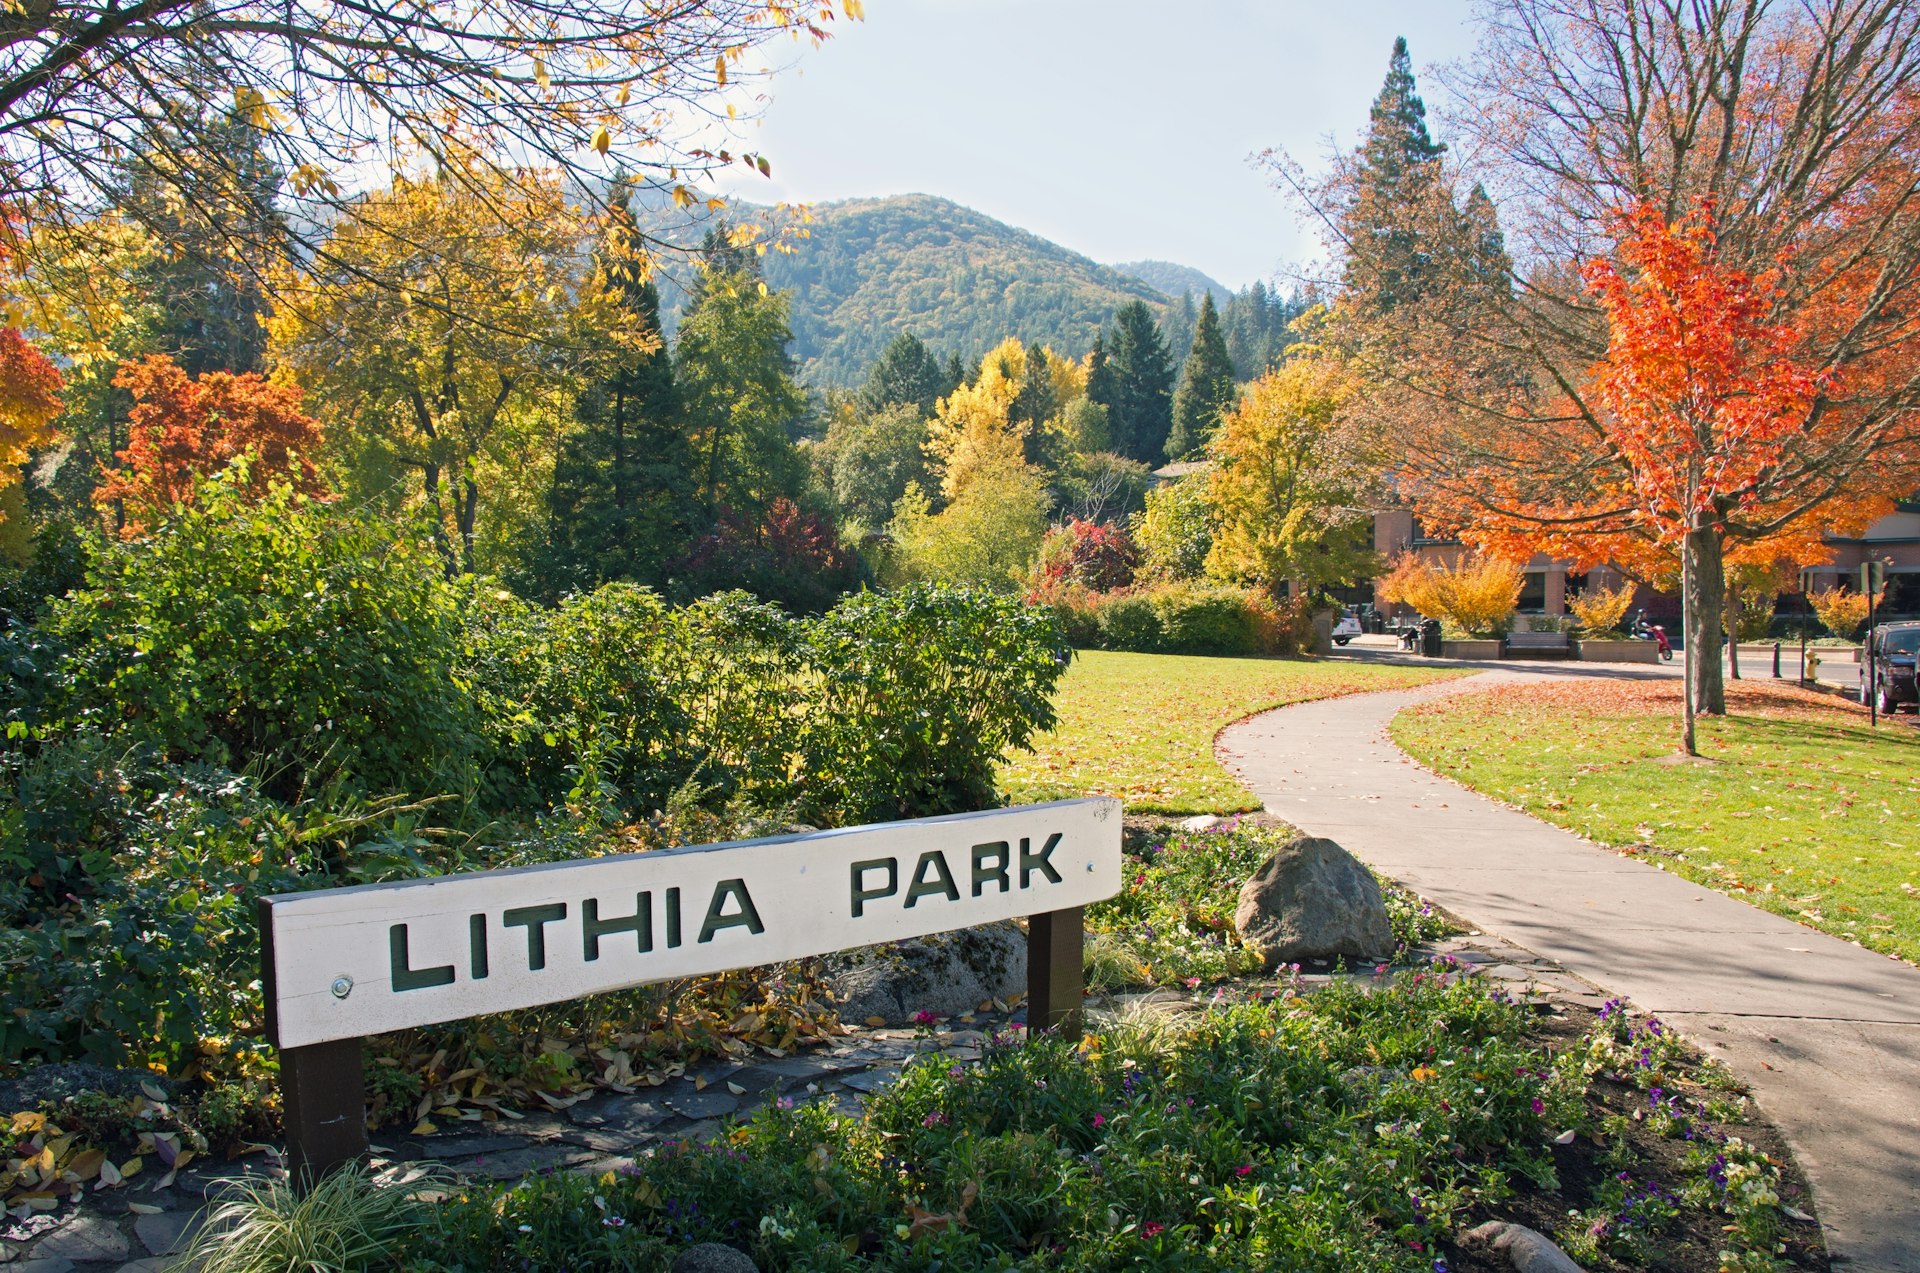 A park sign welcomes visitors to Lithia Park